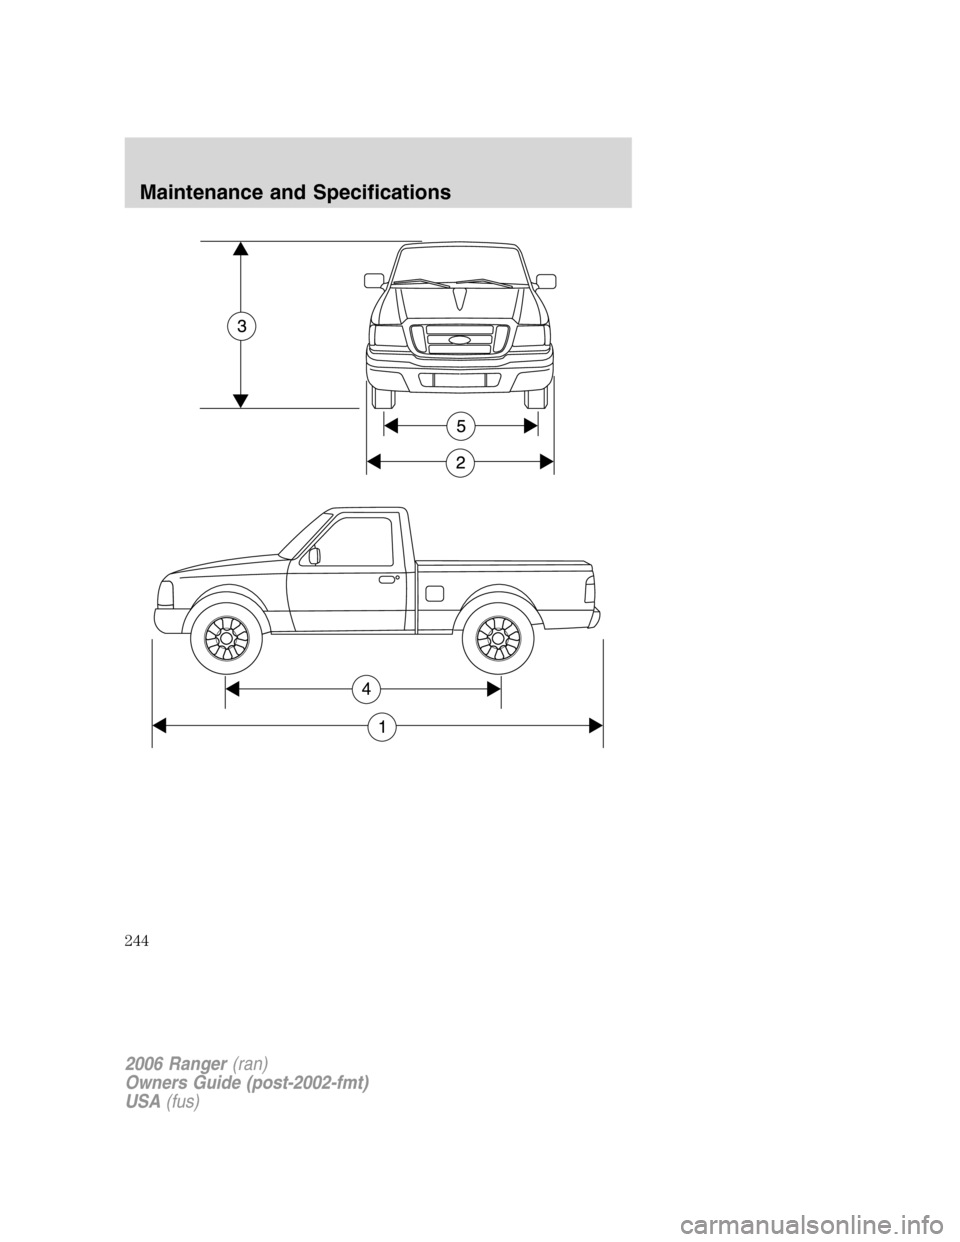 FORD RANGER 2006 2.G Repair Manual 4
1
2006 Ranger(ran)
Owners Guide (post-2002-fmt)
USA(fus)
Maintenance and Specifications
244 